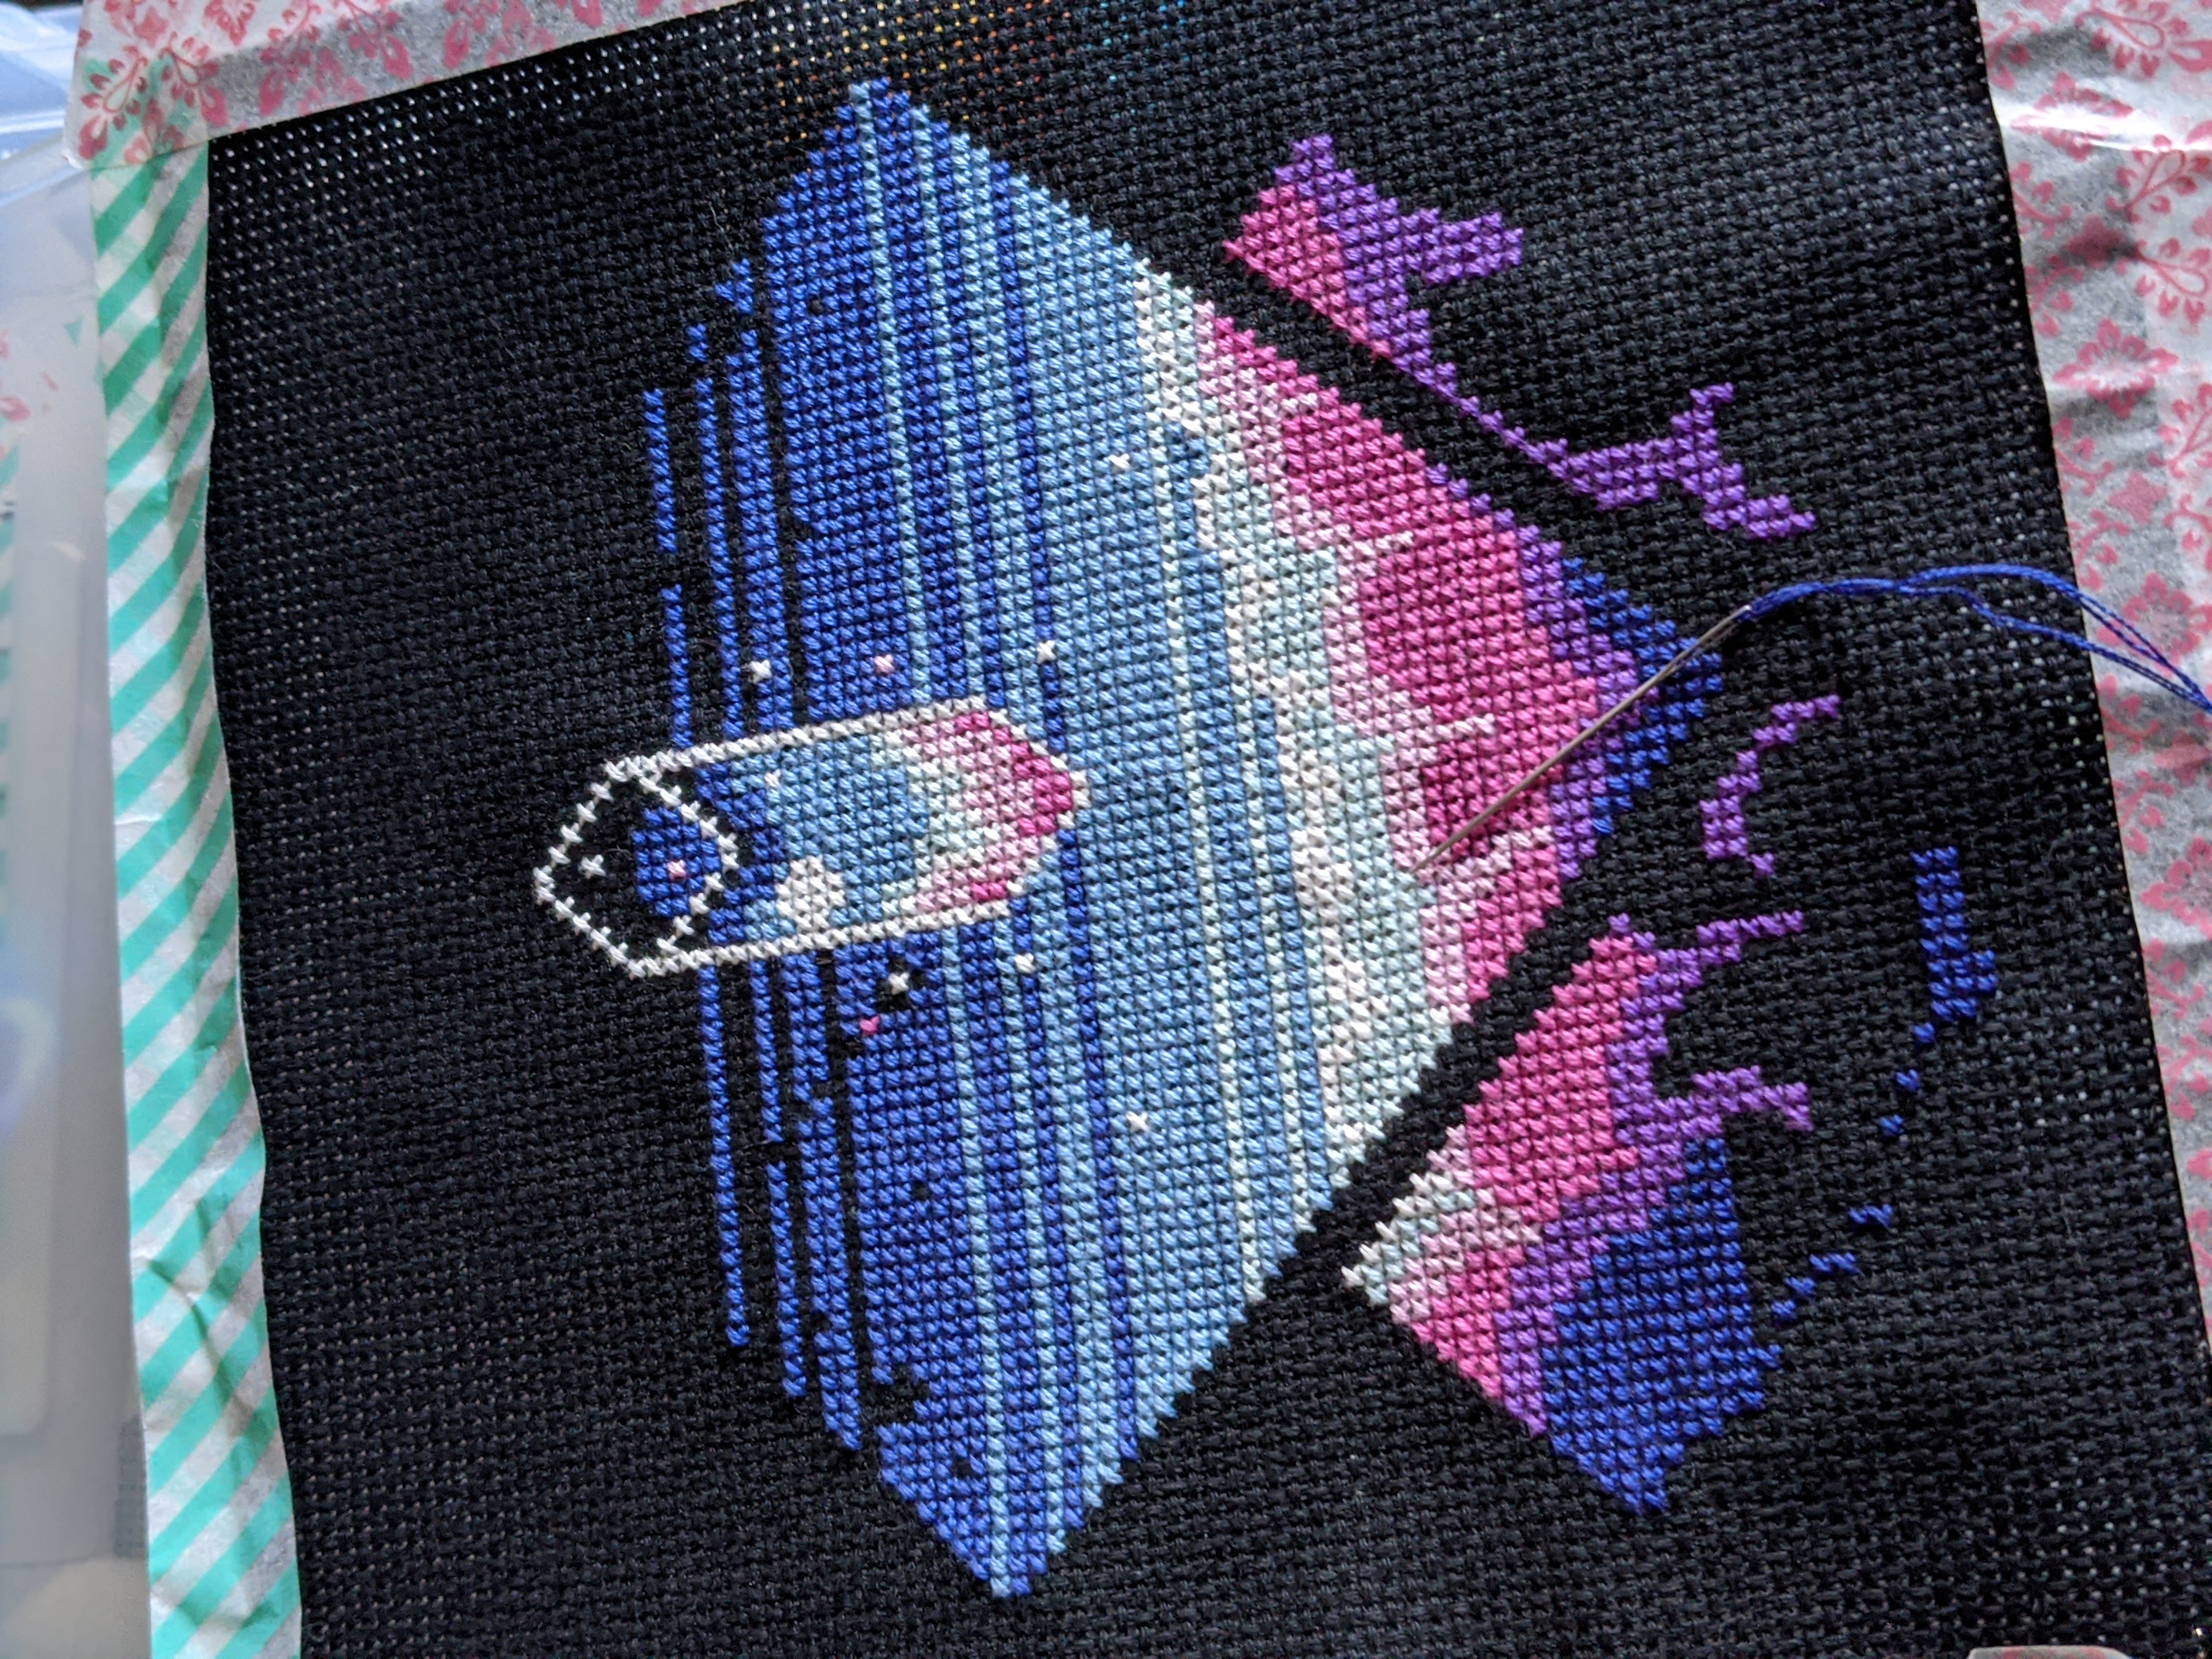 An abstract pixel art piece being turned into a cross stitch piece. It's a variety of blues, purples, pinks, and white.